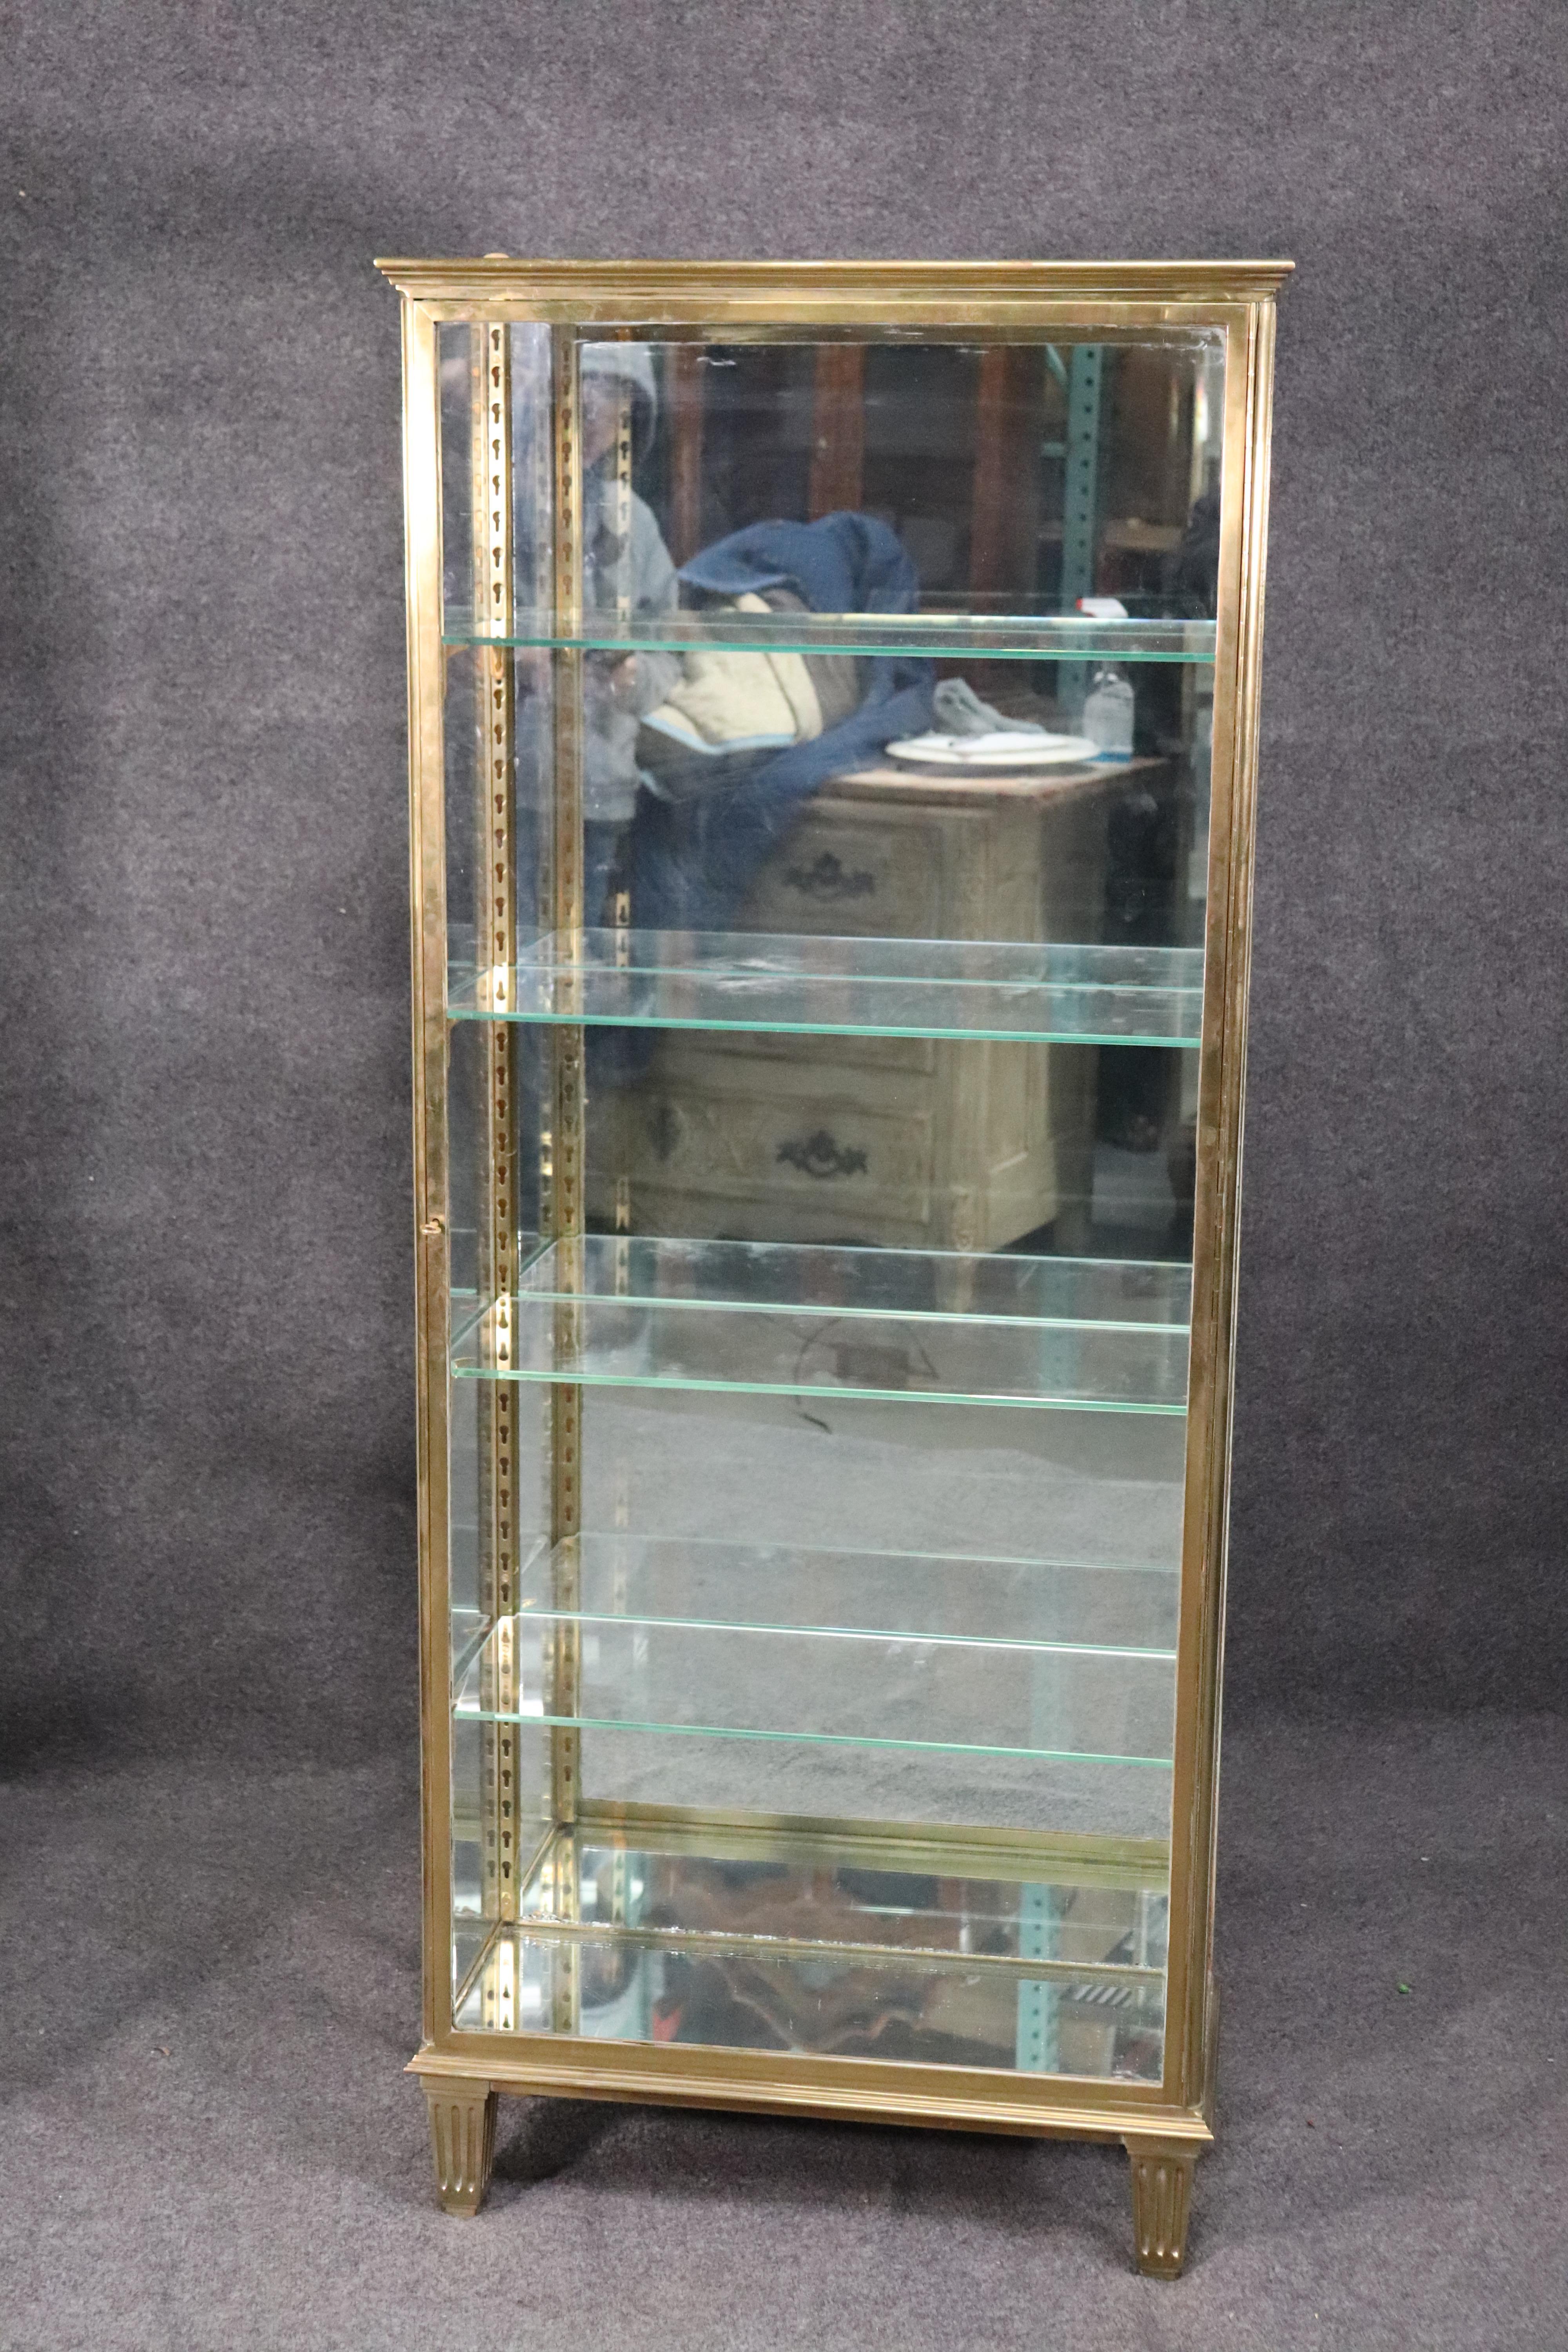 This is a very, very rare pair of French solid brass not tubular hollow brass, vitrines. The vitrines are in superb antique condition and have solid, hearty construction and build quality. They each have removable and adjustable shelves and have